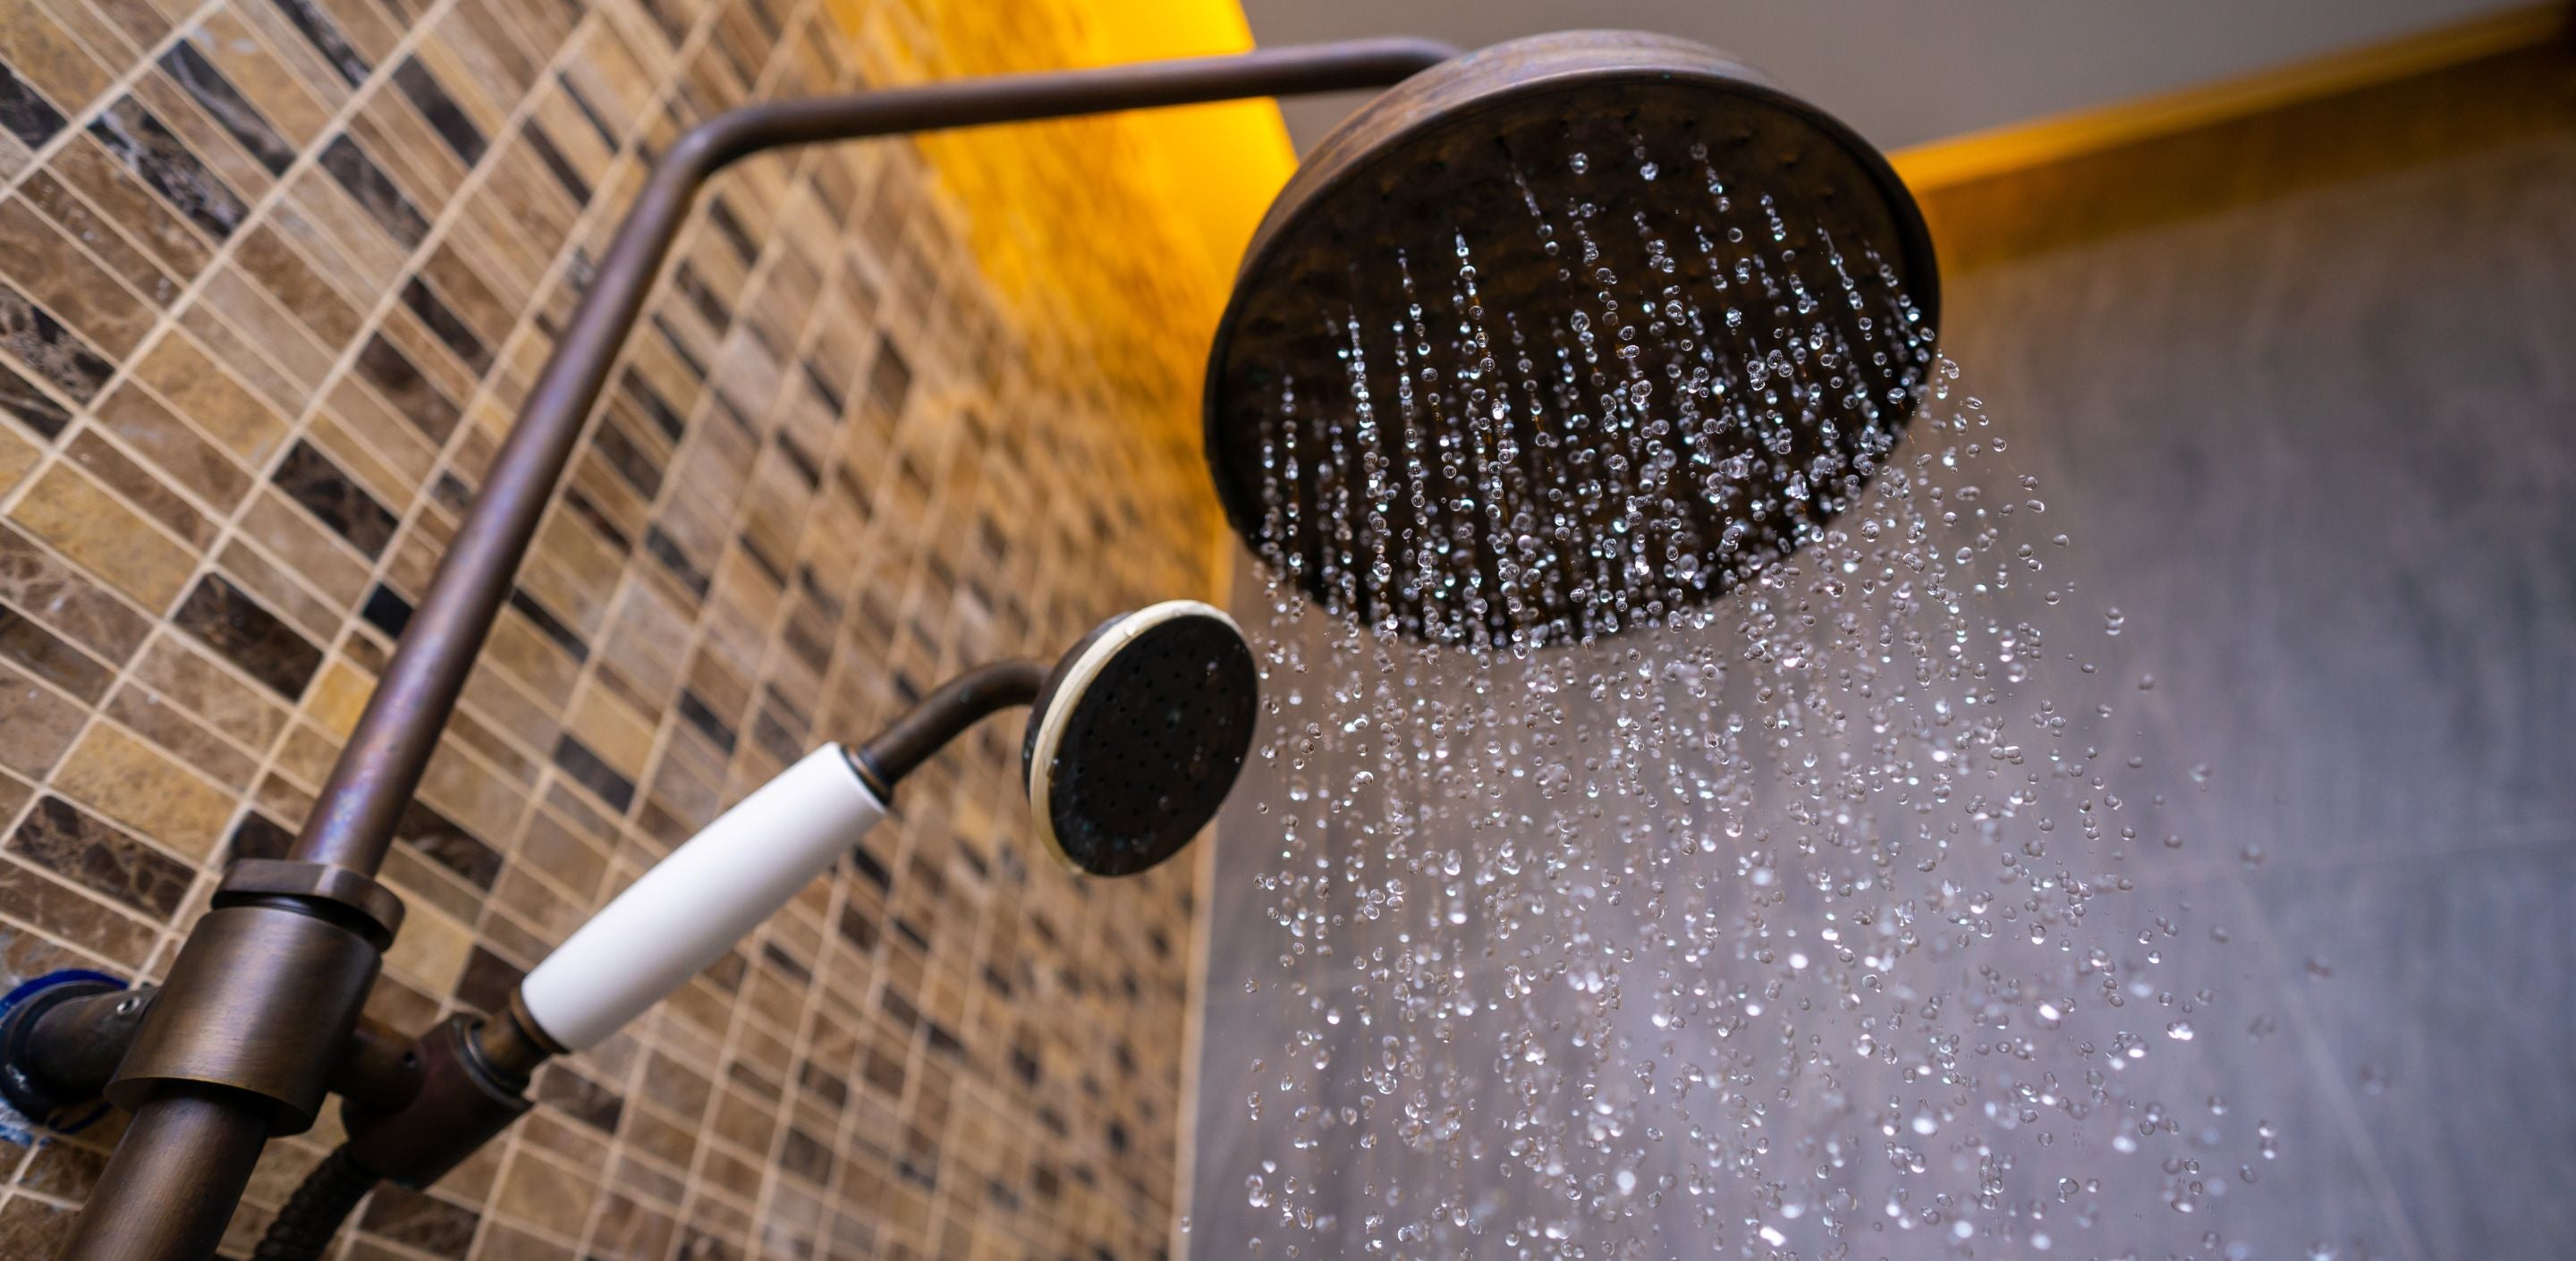 Who takes the longest shower in your house?